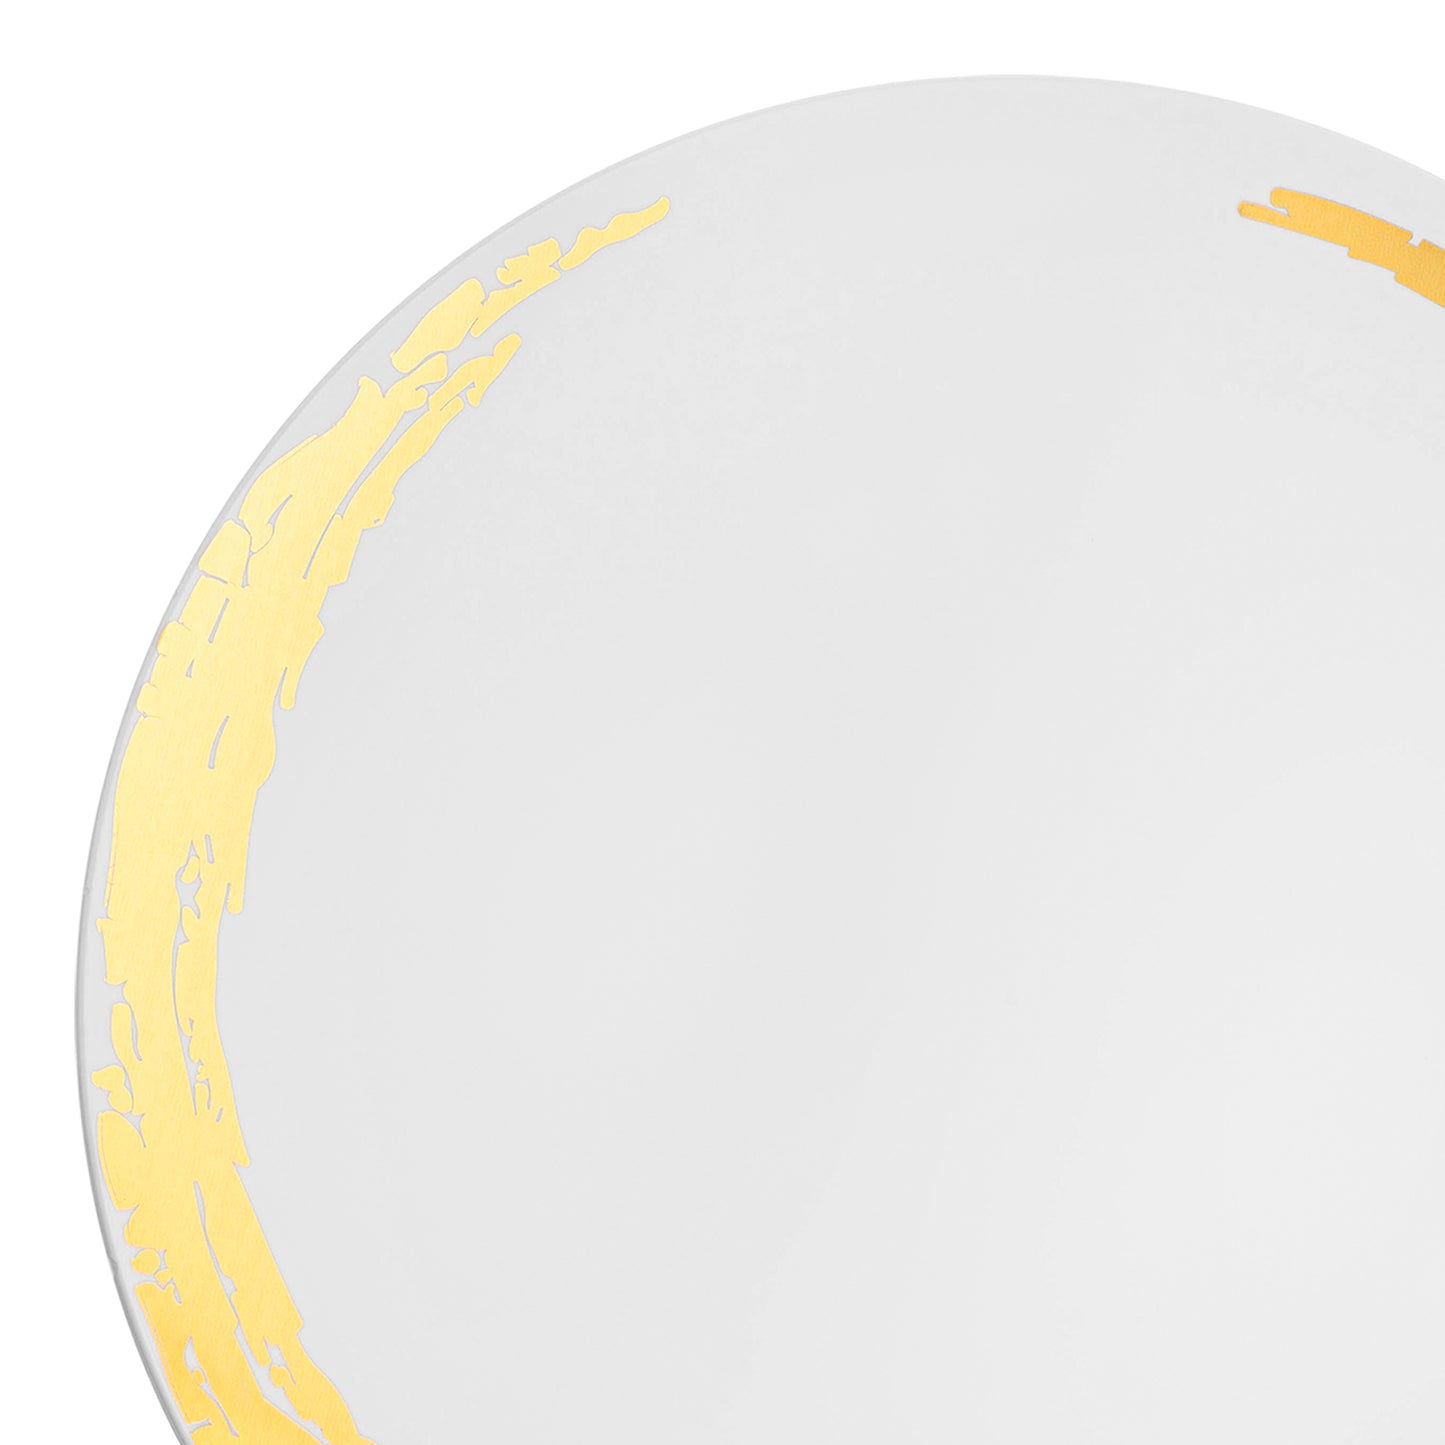 White with Gold Moonlight Round Disposable Plastic Appetizer/Salad Plates (7.5") | The Kaya Collection